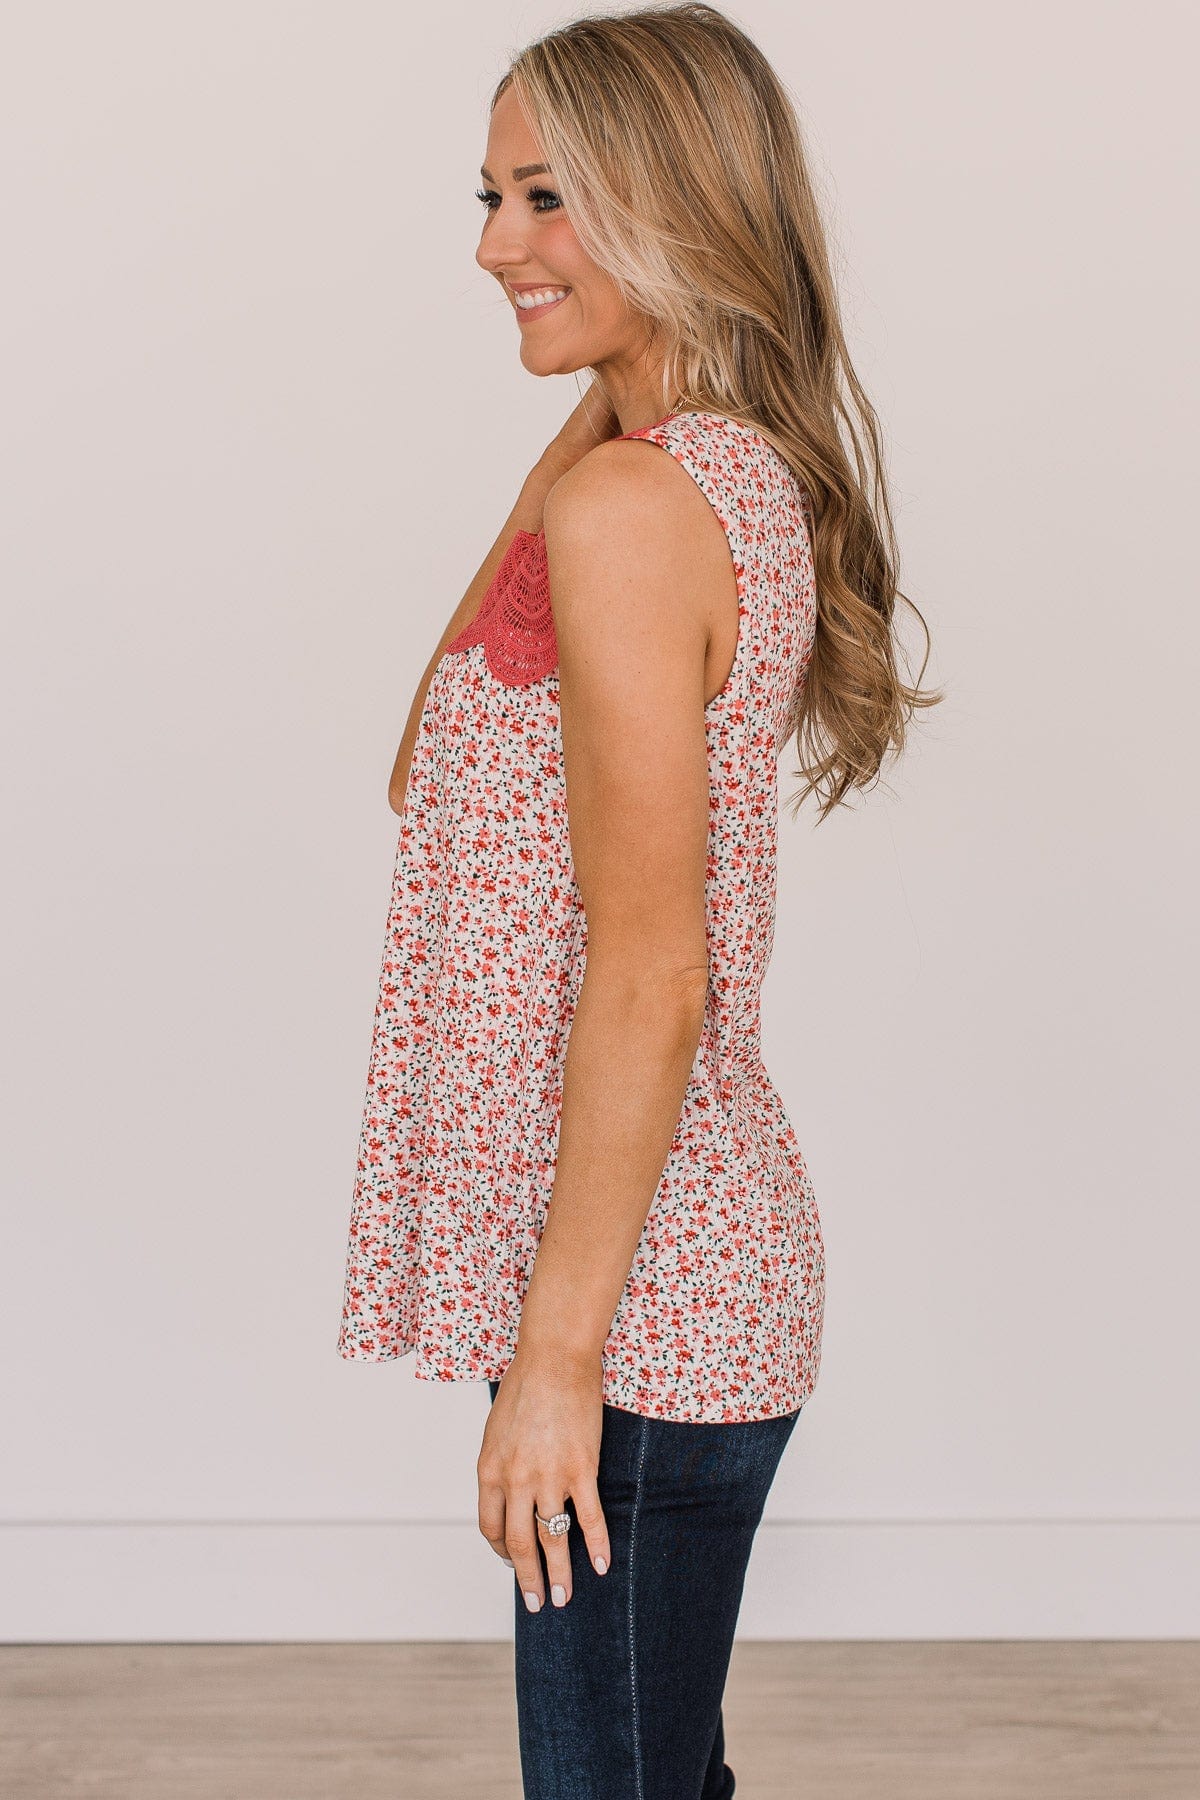 Maybe Someday Floral Lace Tank Top- Ivory & Coral